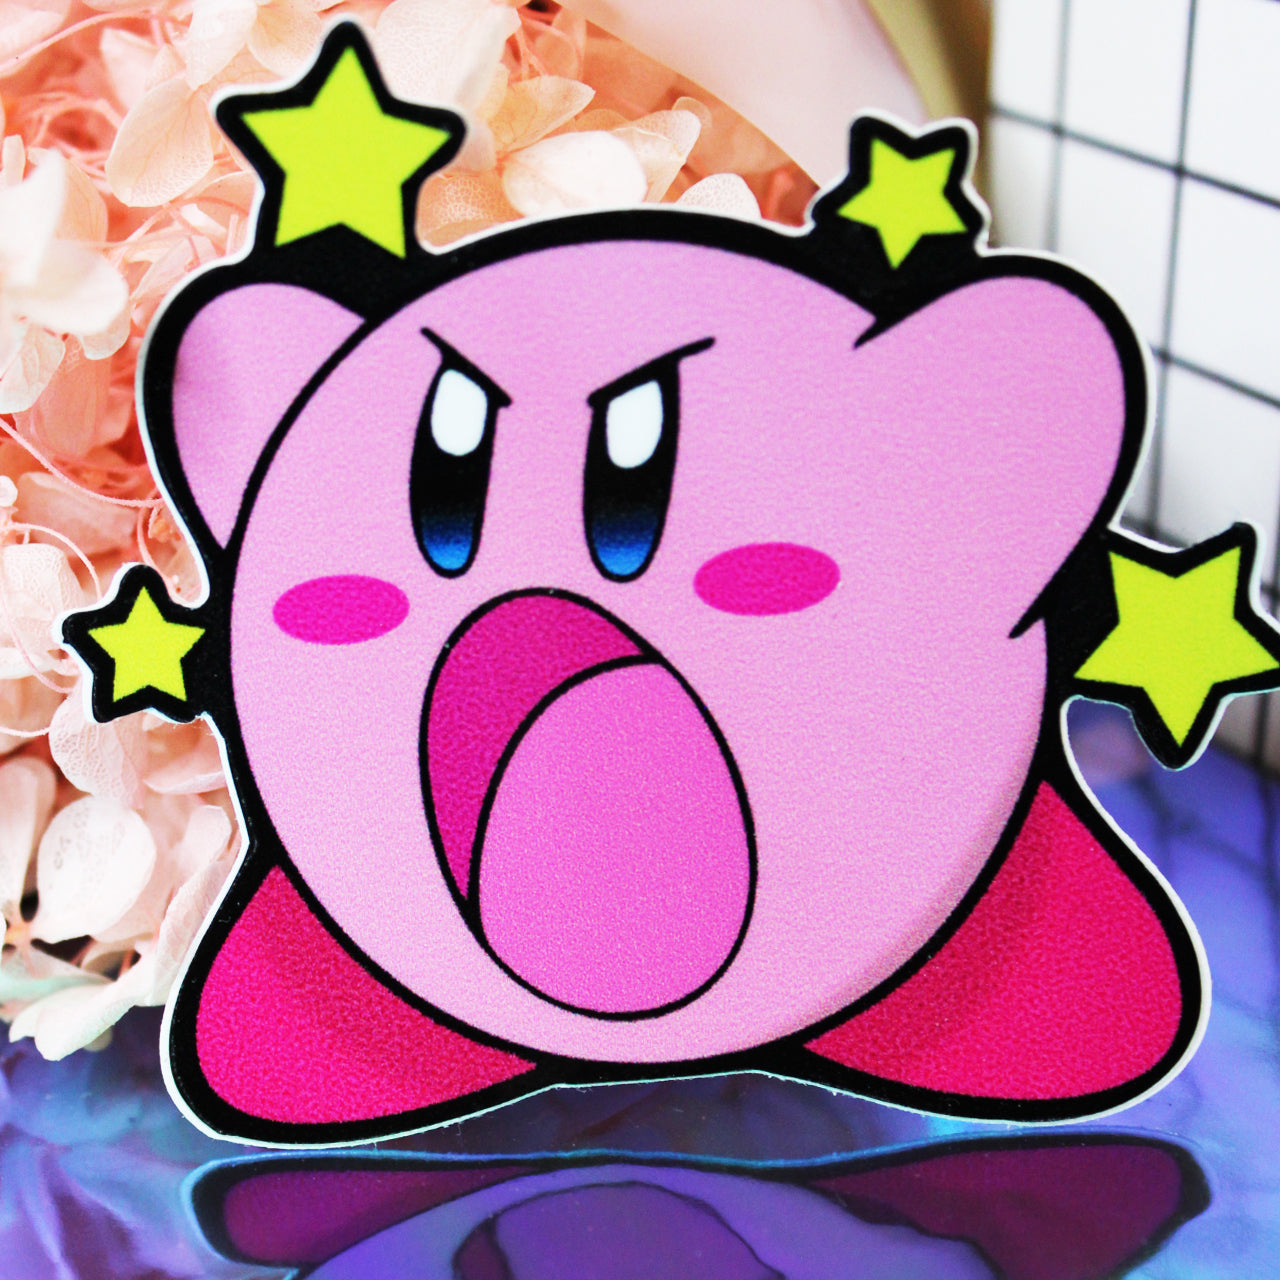 Kirby with yellow stars in background